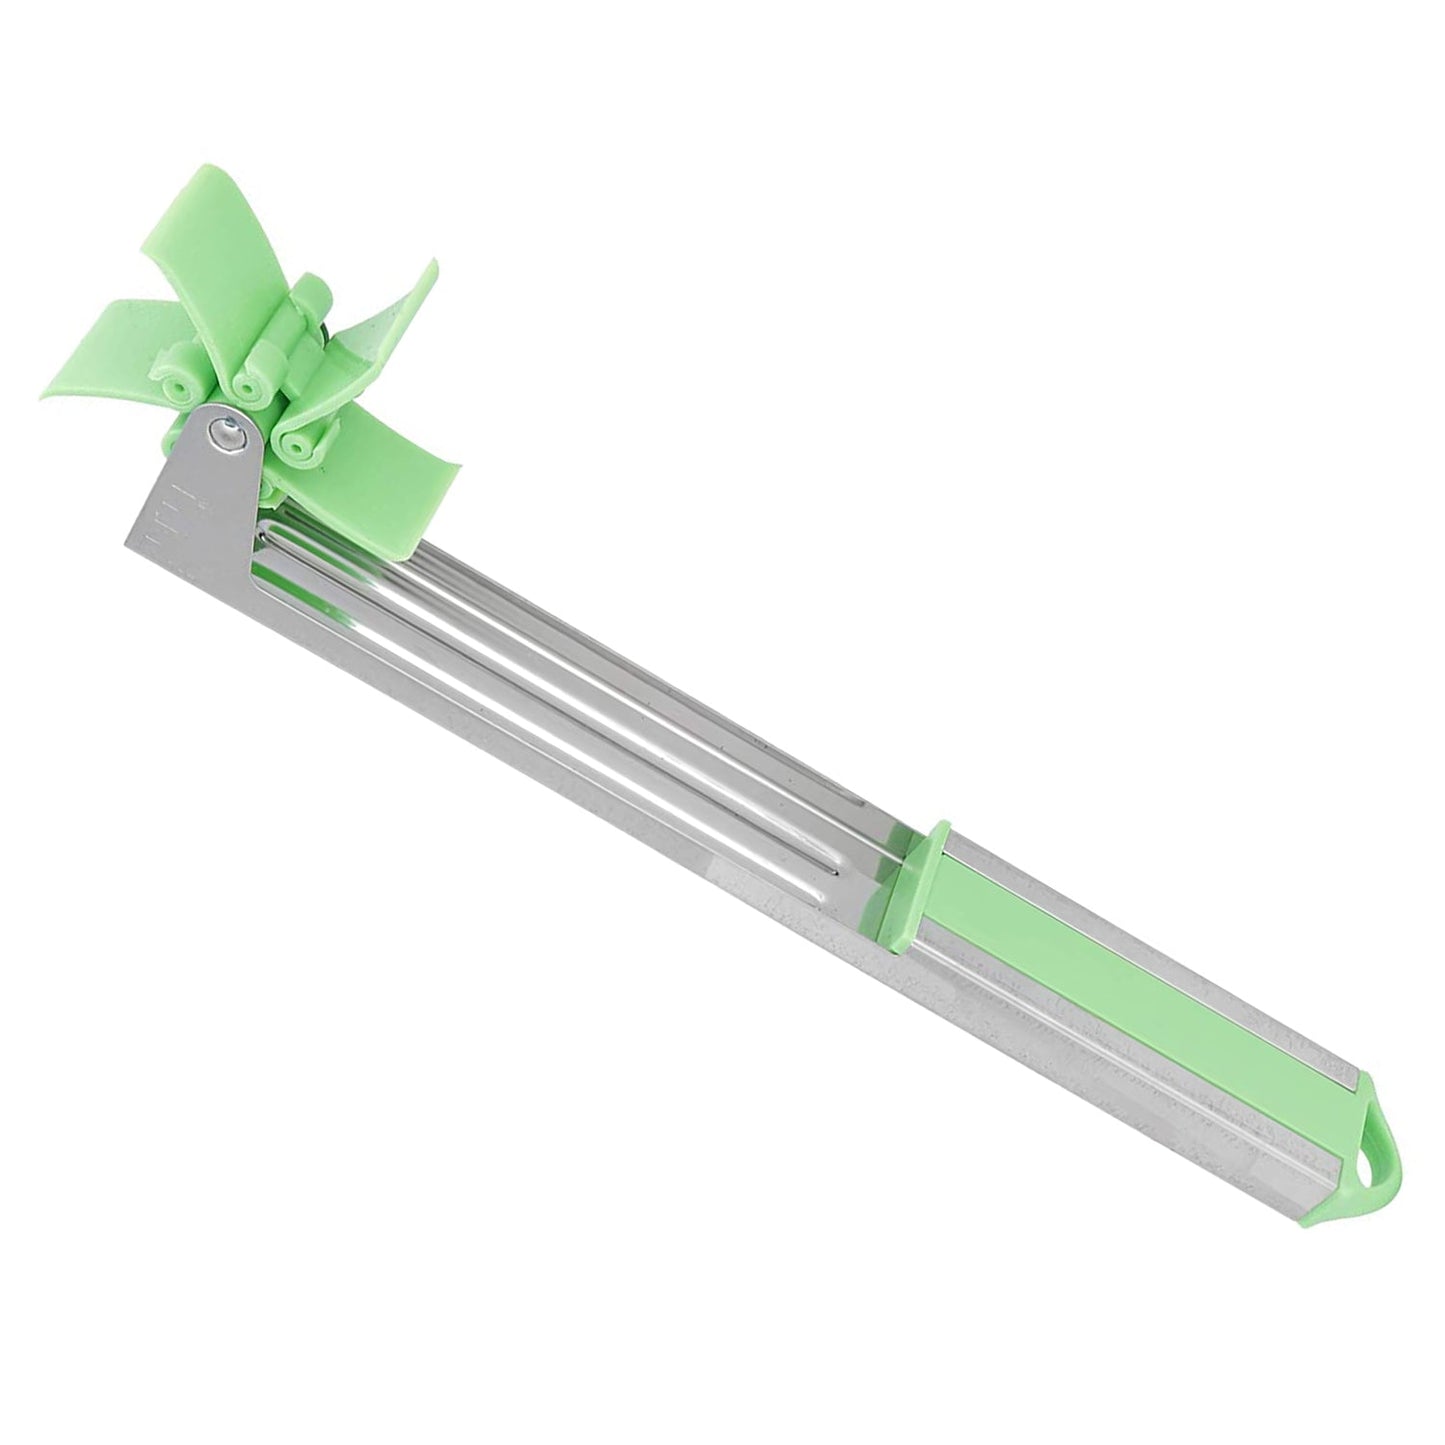 Stainless Steel Washable Watermelon Cutter Windmill Slicer Cutter Peeler